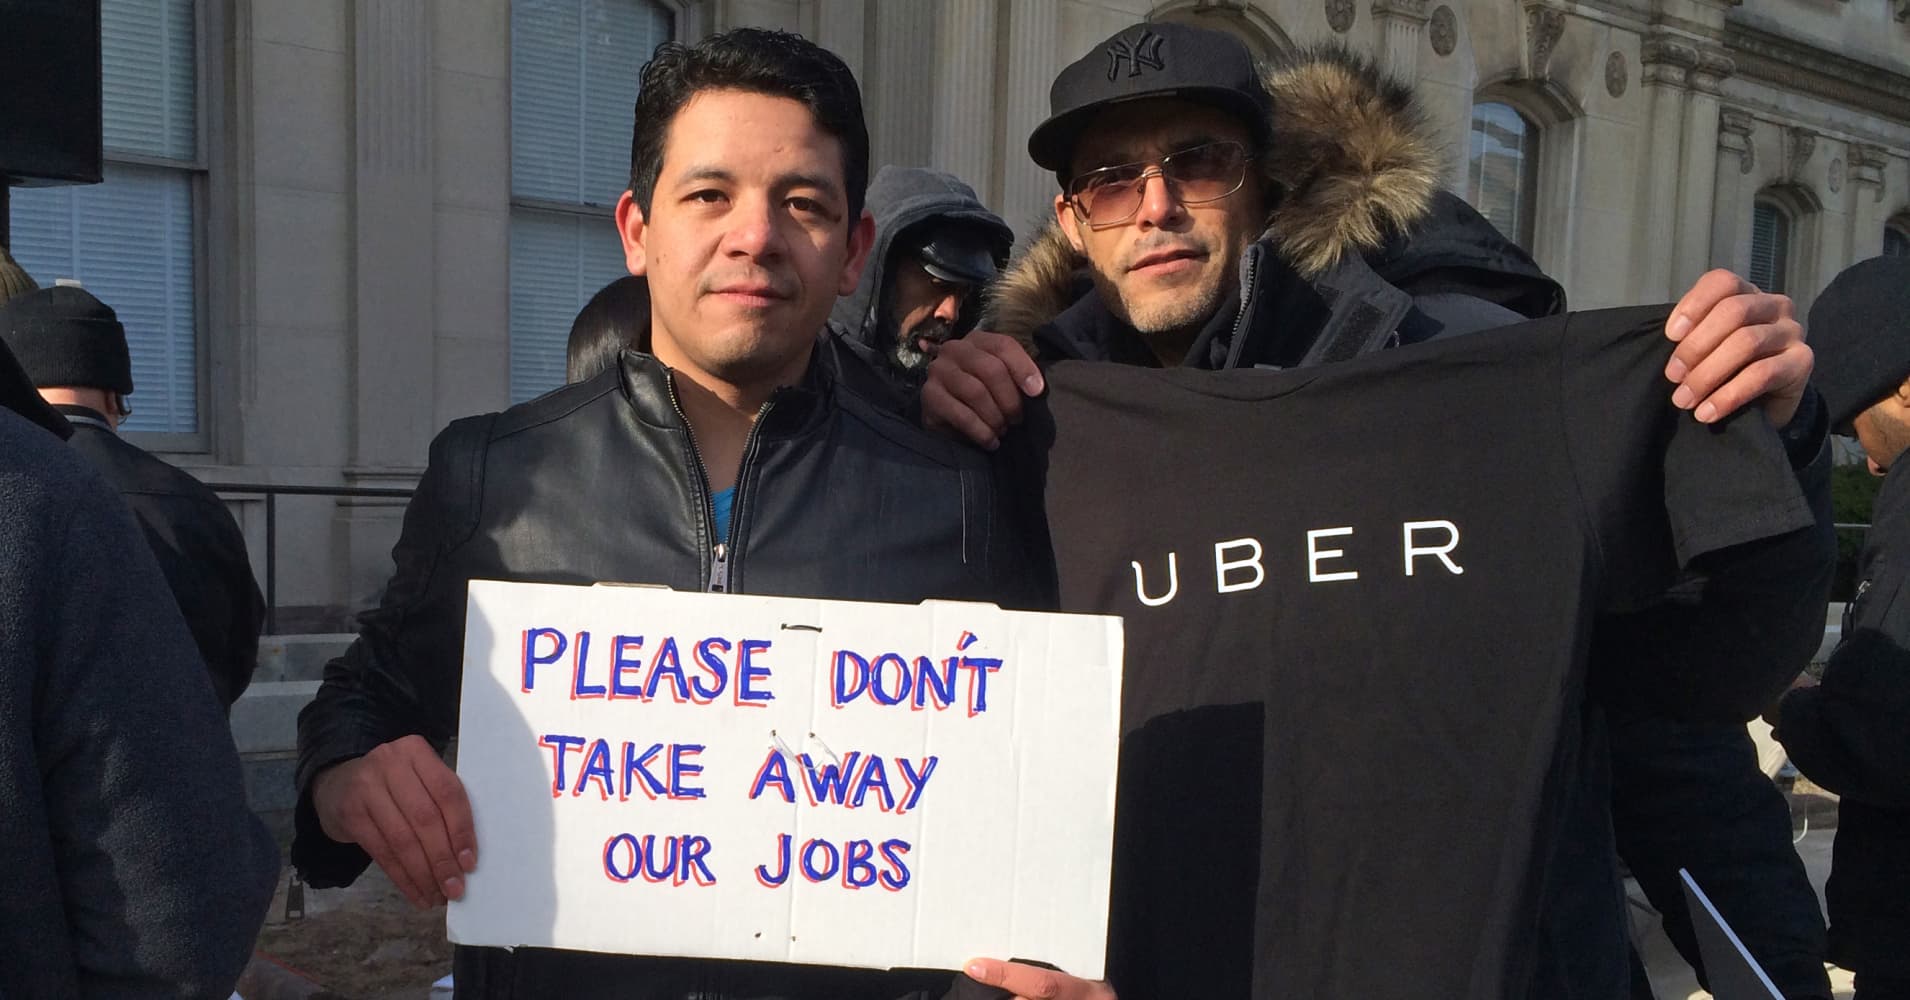 Uber drivers protest against proposed New Jersey rules1910 x 1000